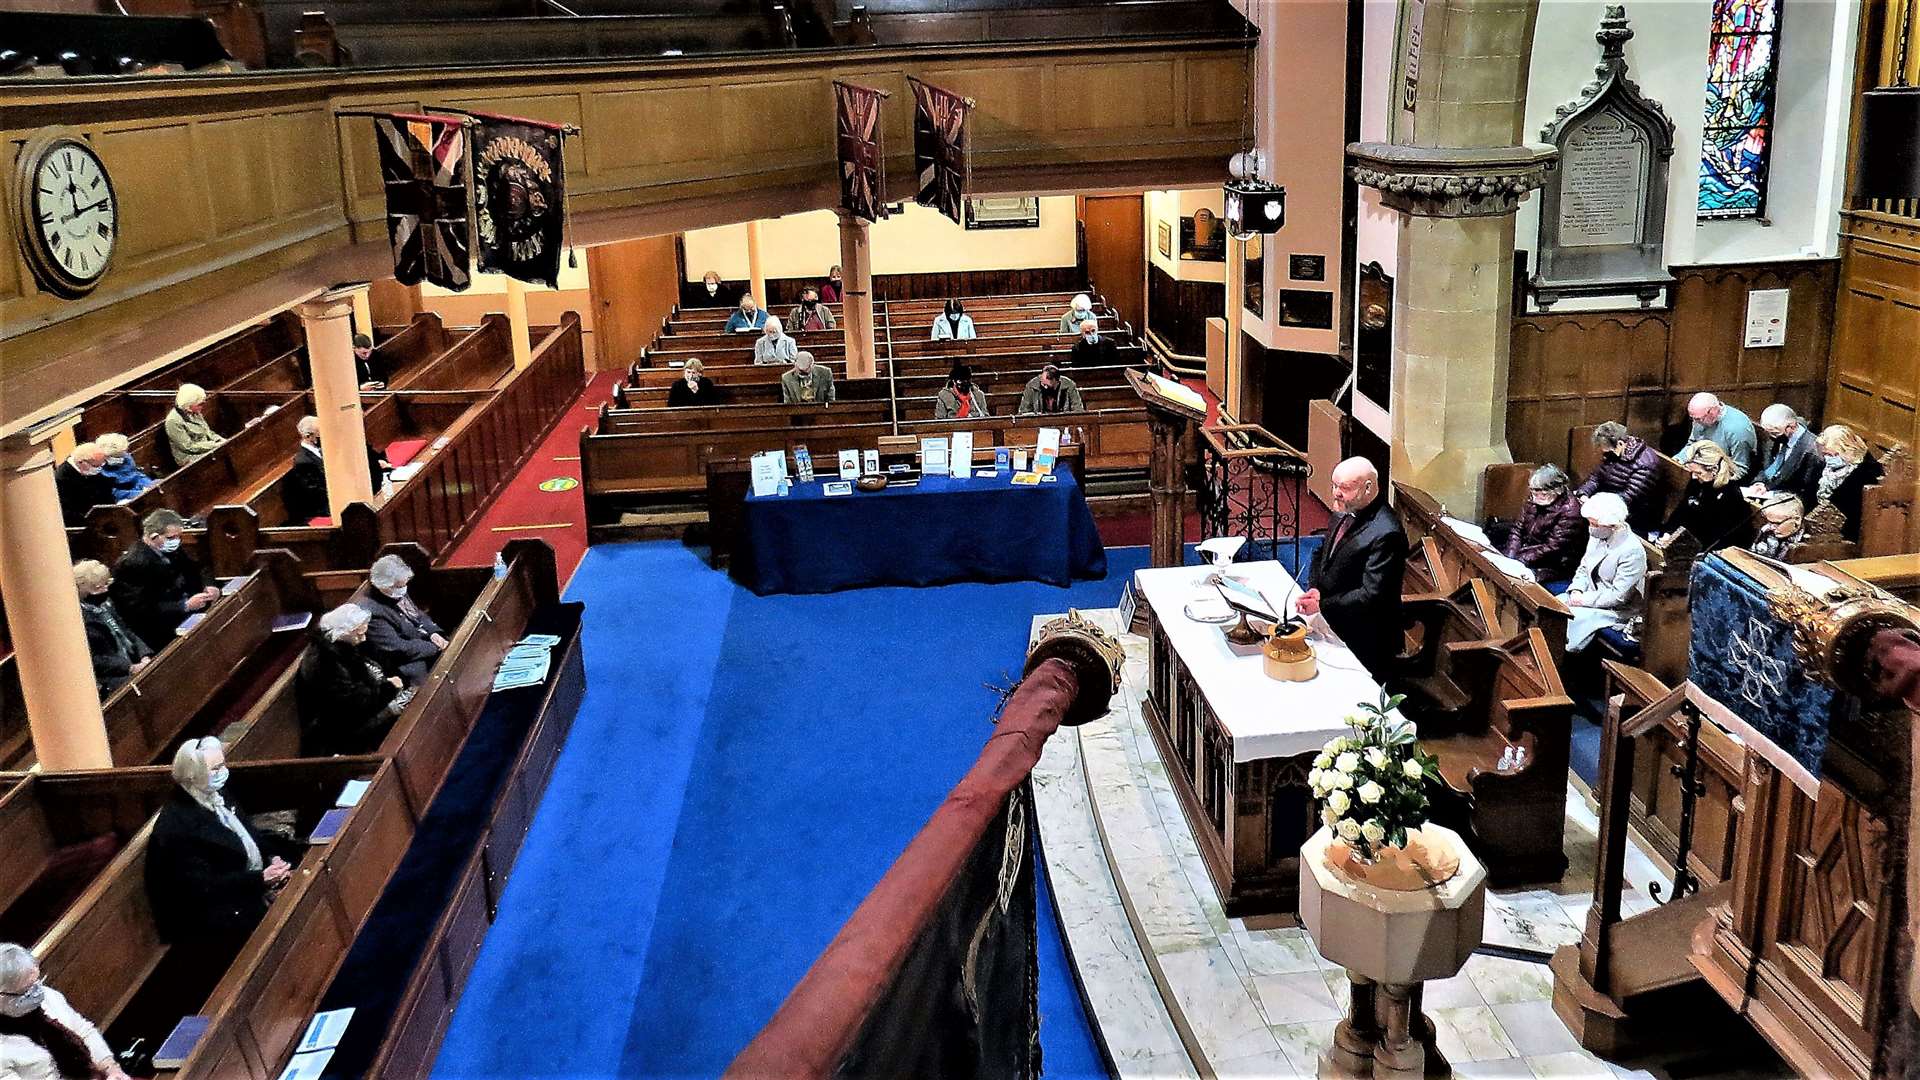 The last regular service at the Old High Church, Inverness, took place in January.